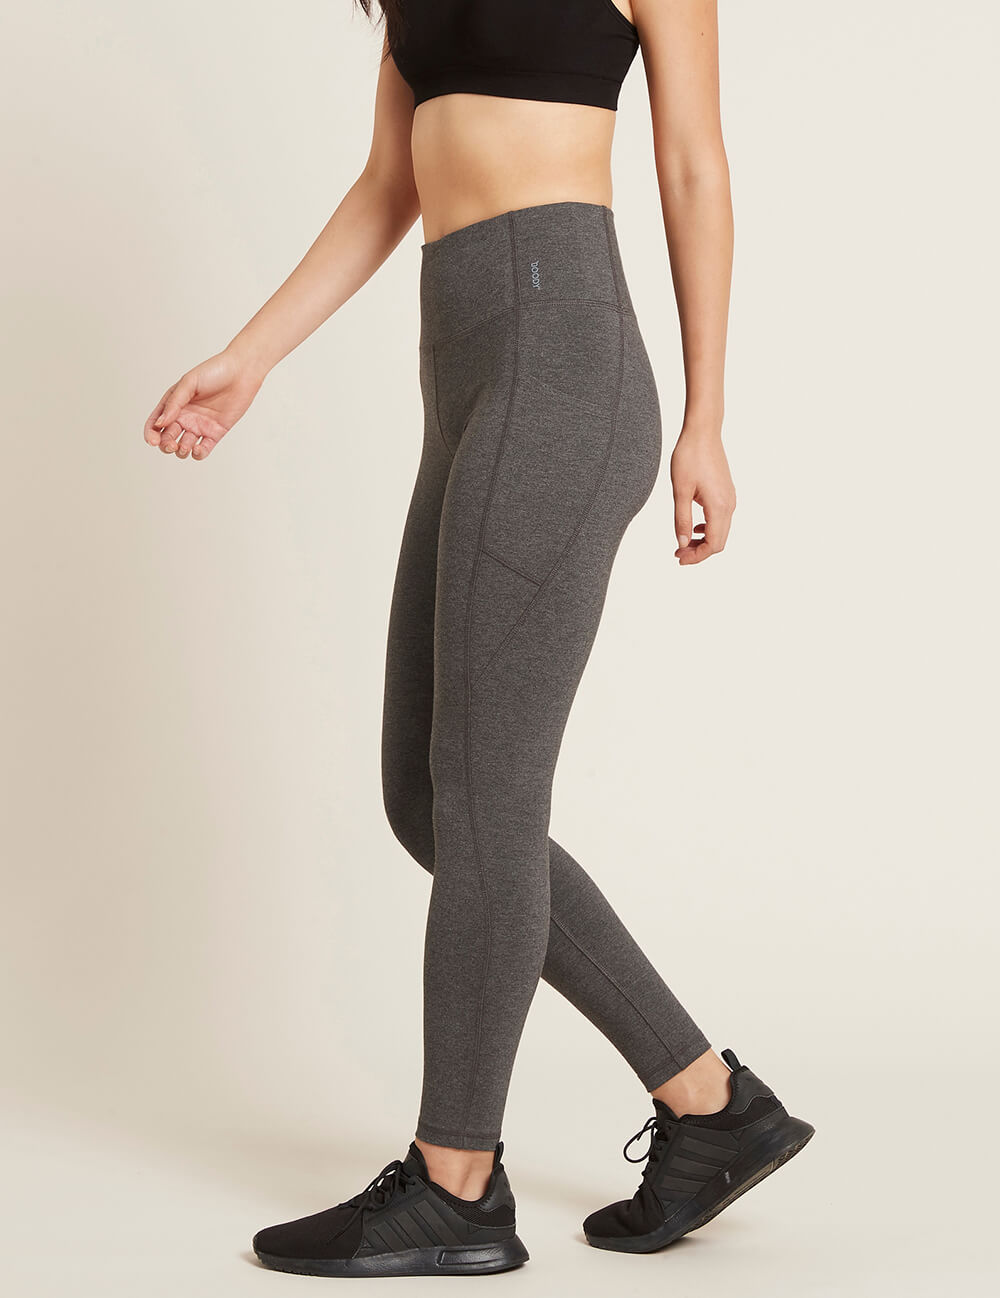 Boody Bamboo Organic Cotton Active Blended High-Waisted Full Leggings with Pocket in Dark Grey Side View